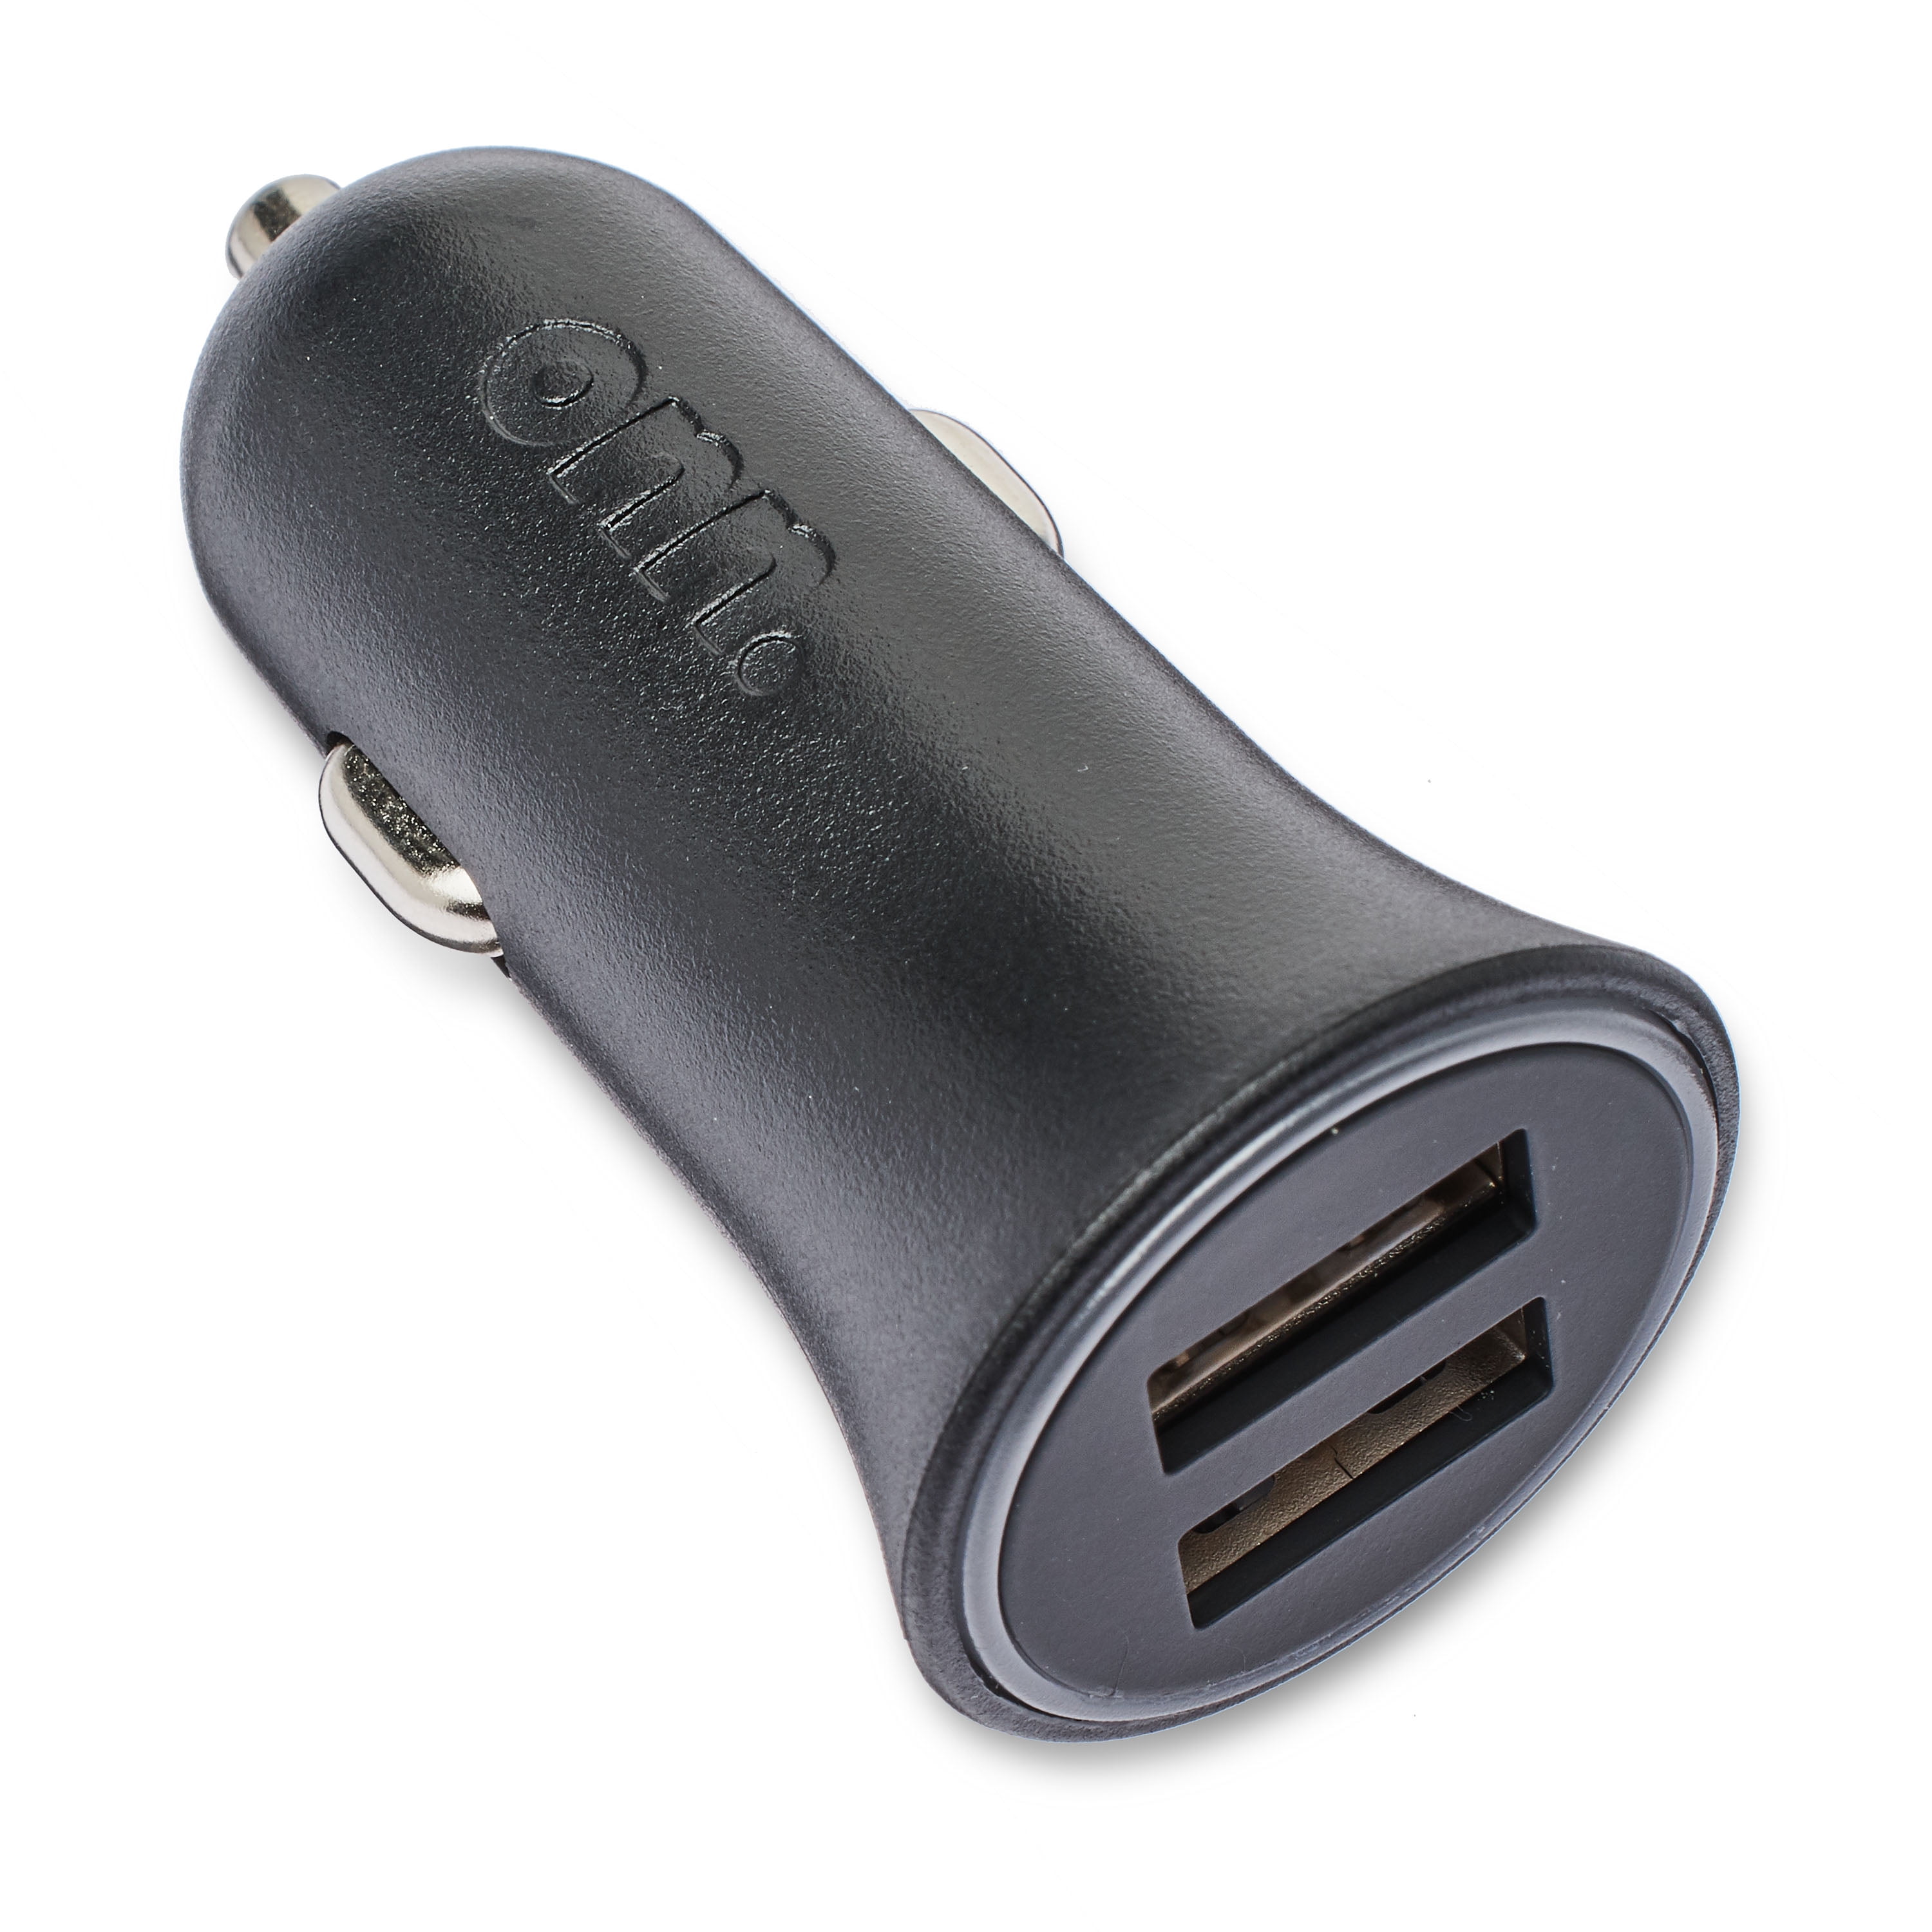 onn. Dual-Port Car Charger, Black,LED power indicator, cell phone charger,  charge an additional device at the same time,universal device. Friendly  plug into car's DC adapter. 